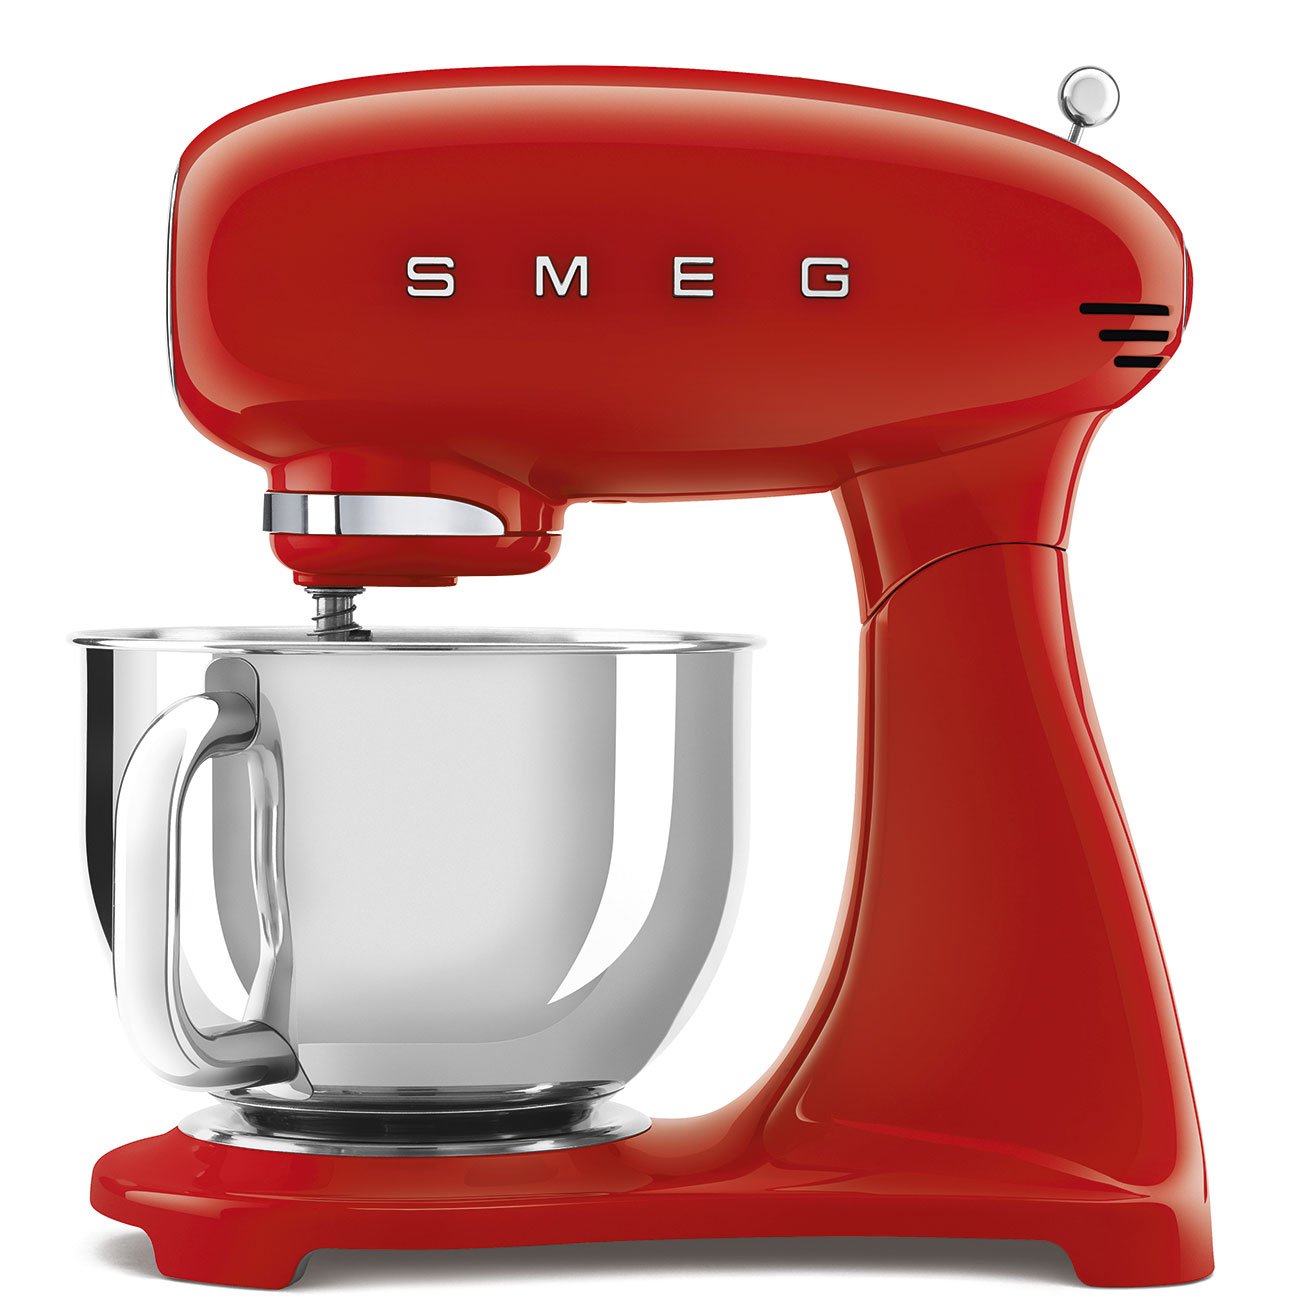 Smeg Full-Color Stand Mixer